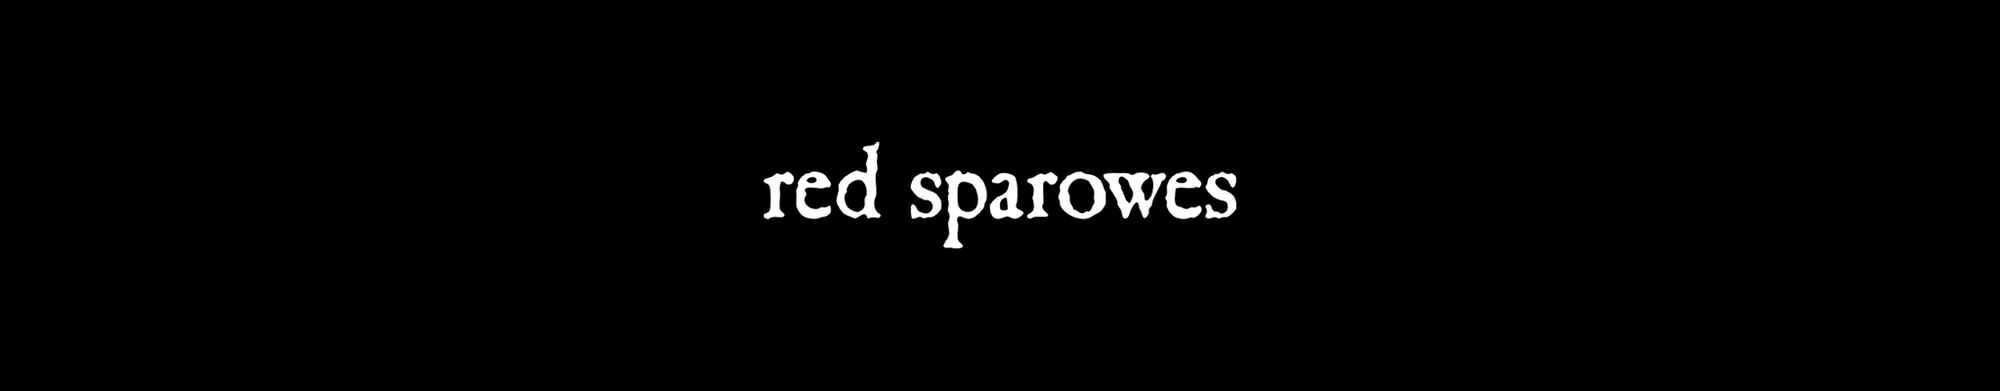 RED SPAROWES